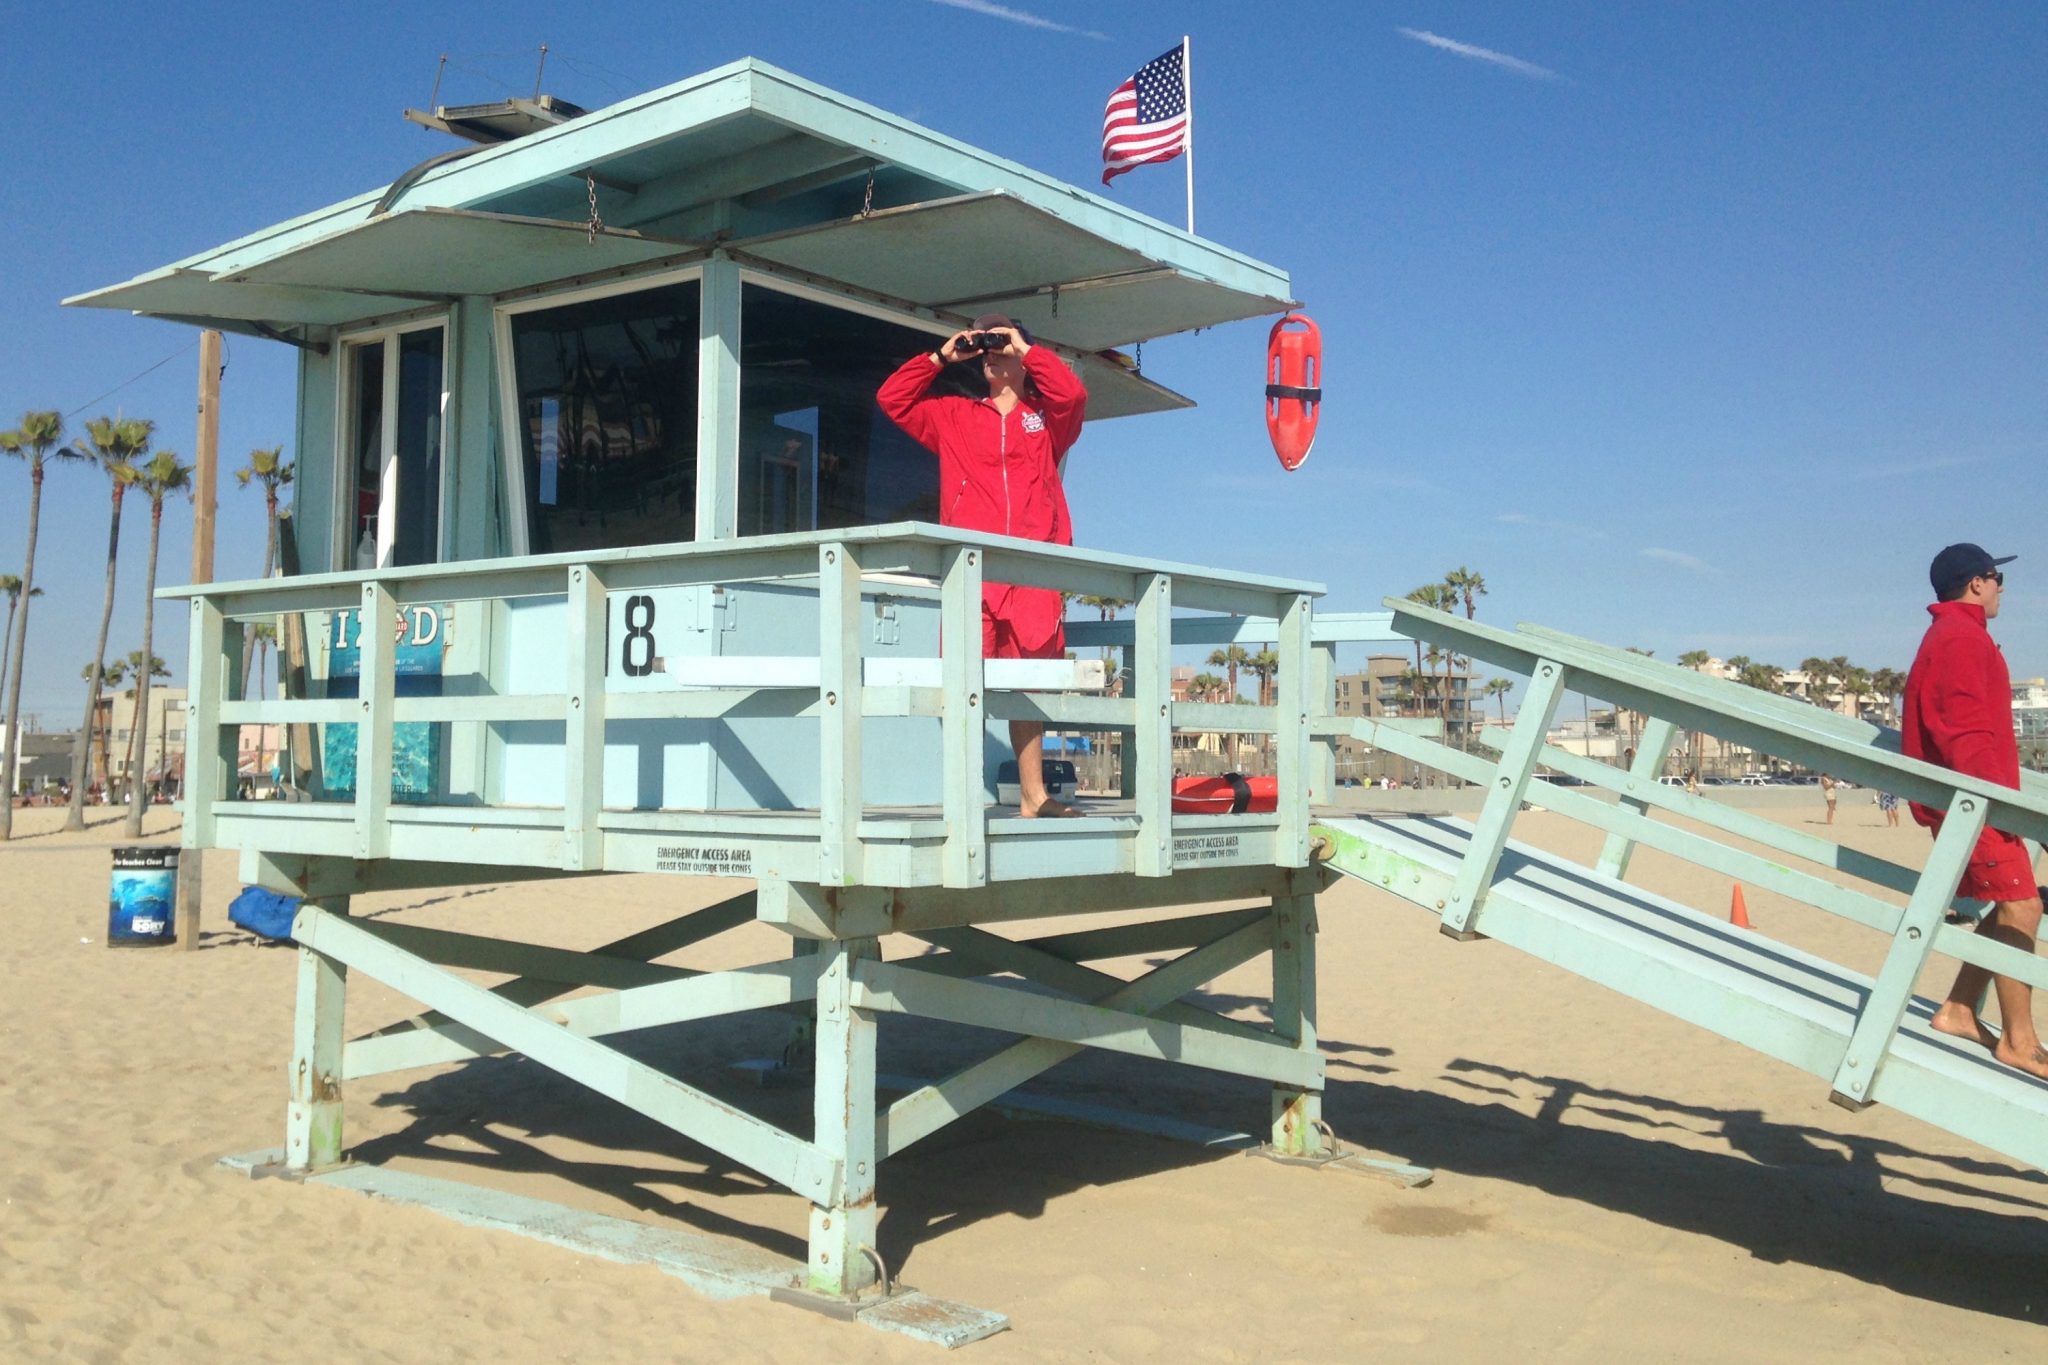 Baywatch in Los Angeles